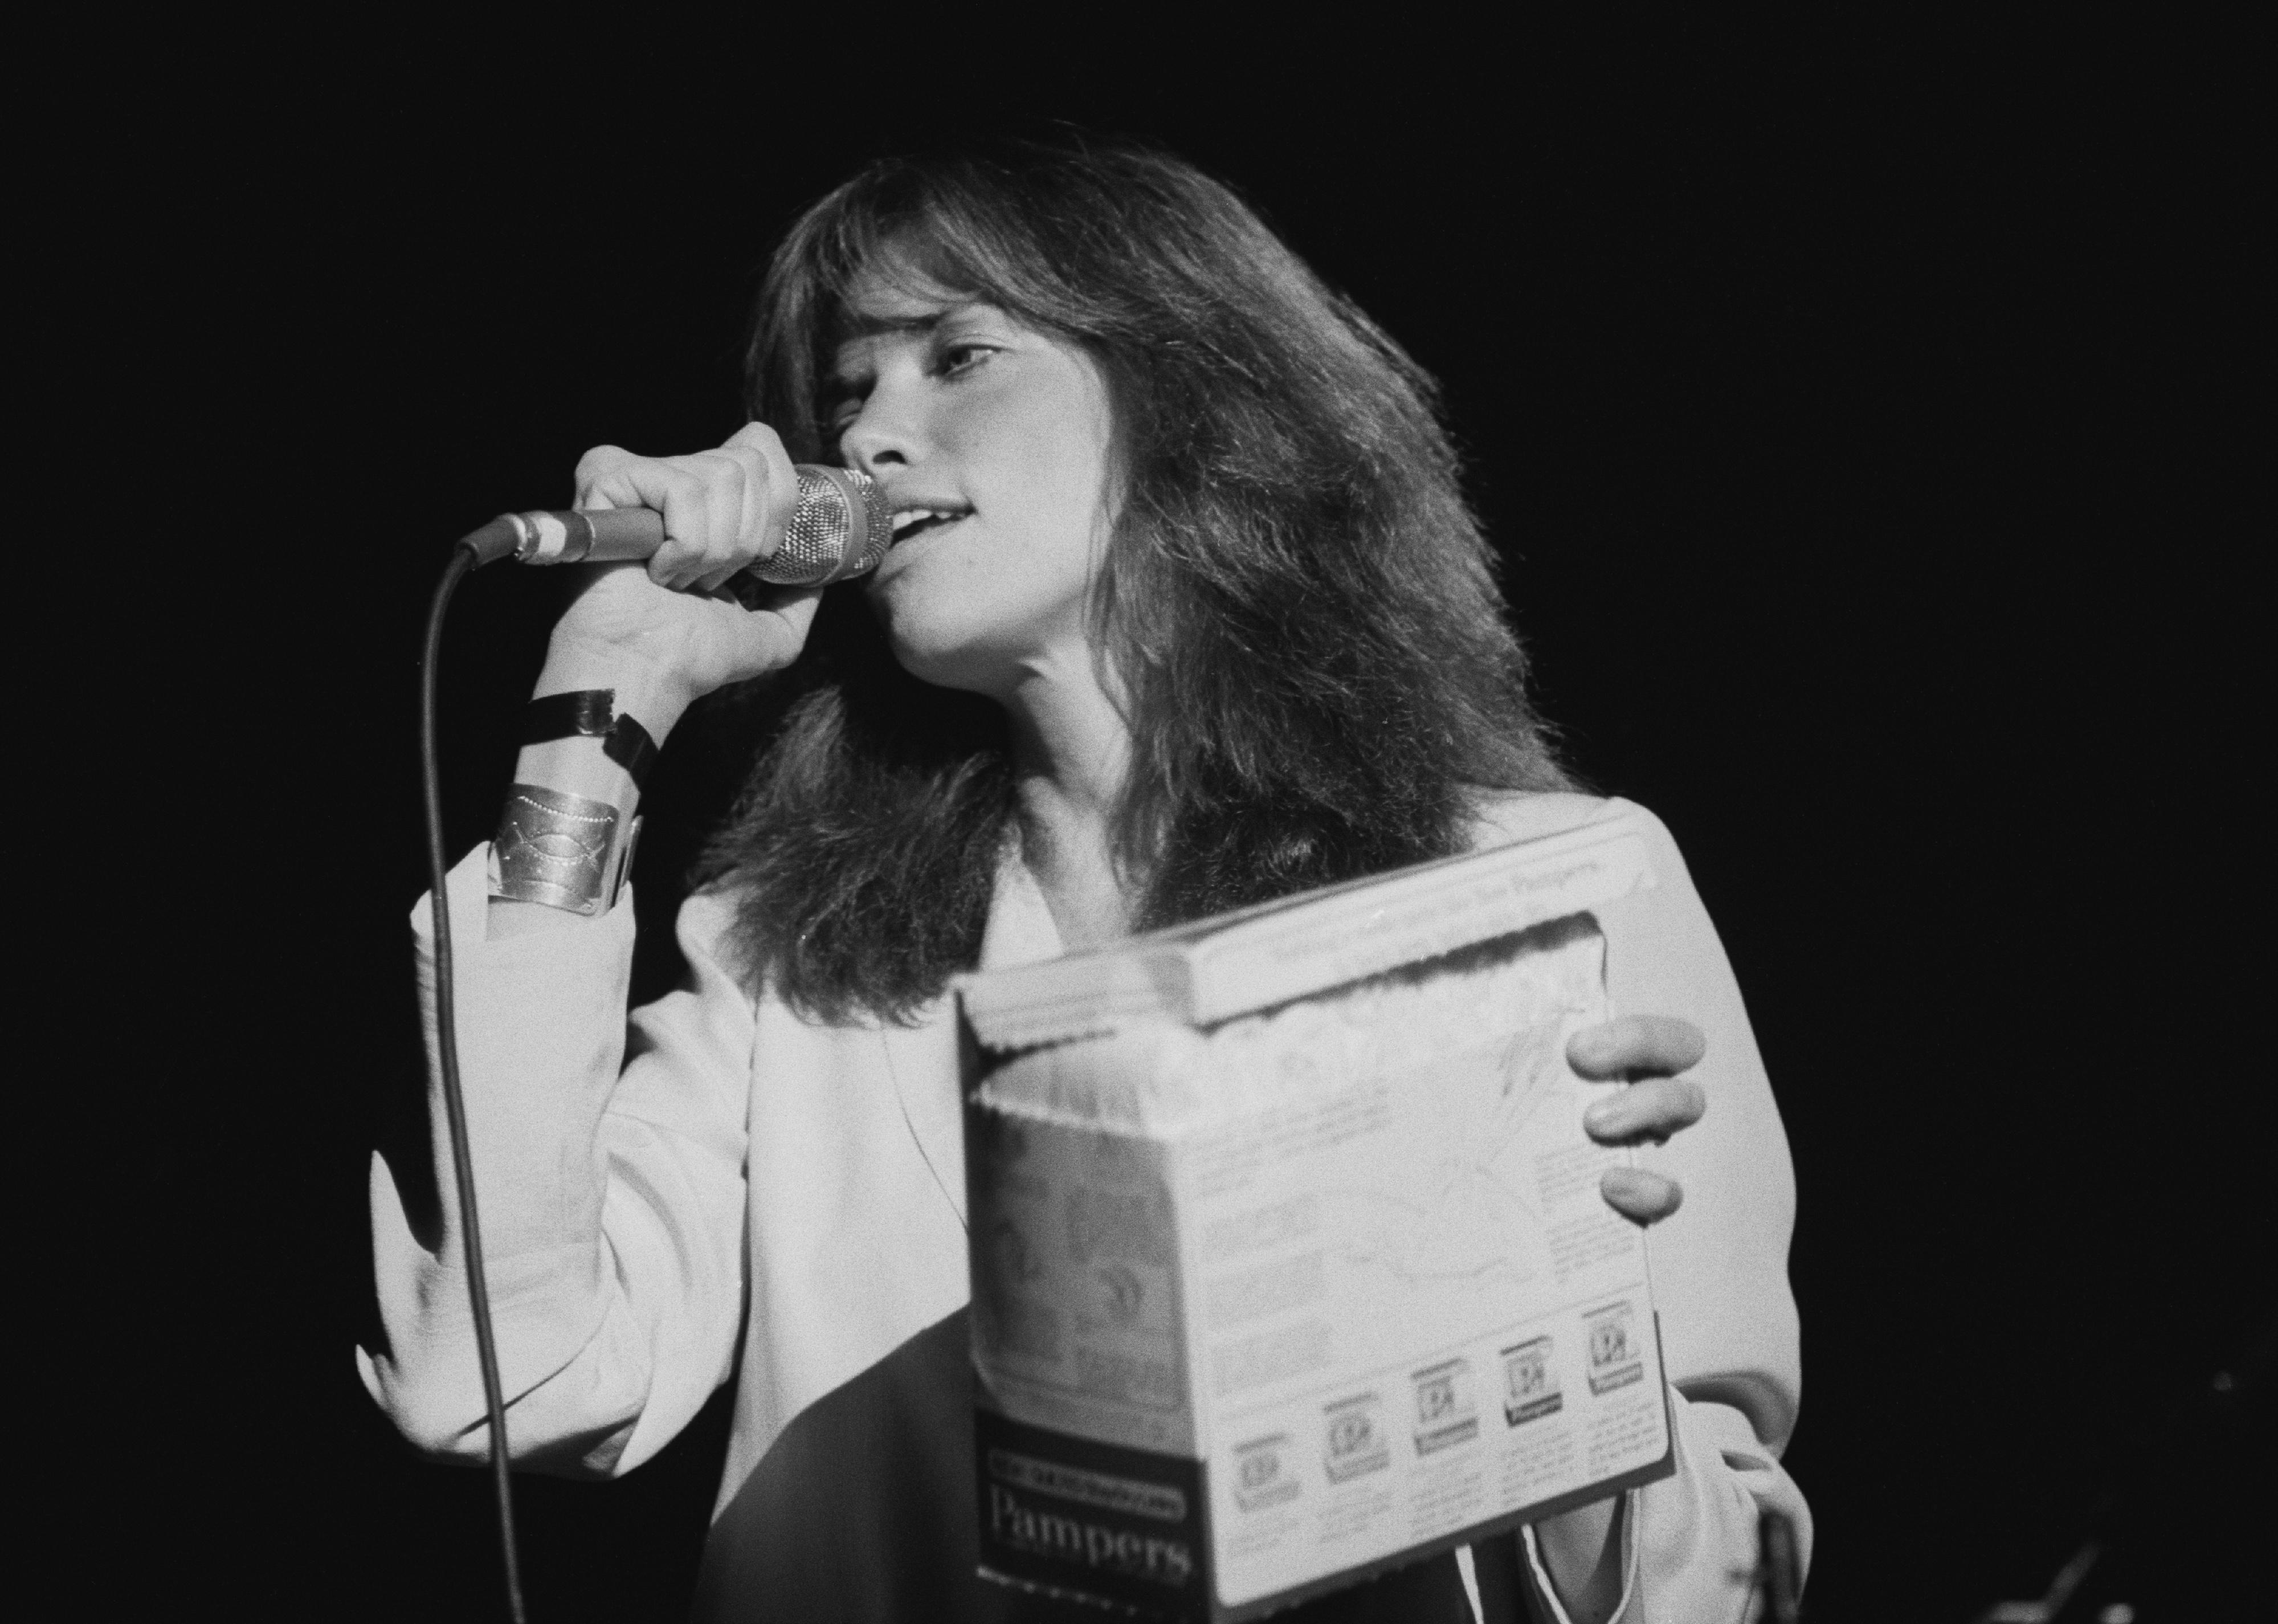 Carly Simon holding a box of disposable nappies as she sings.